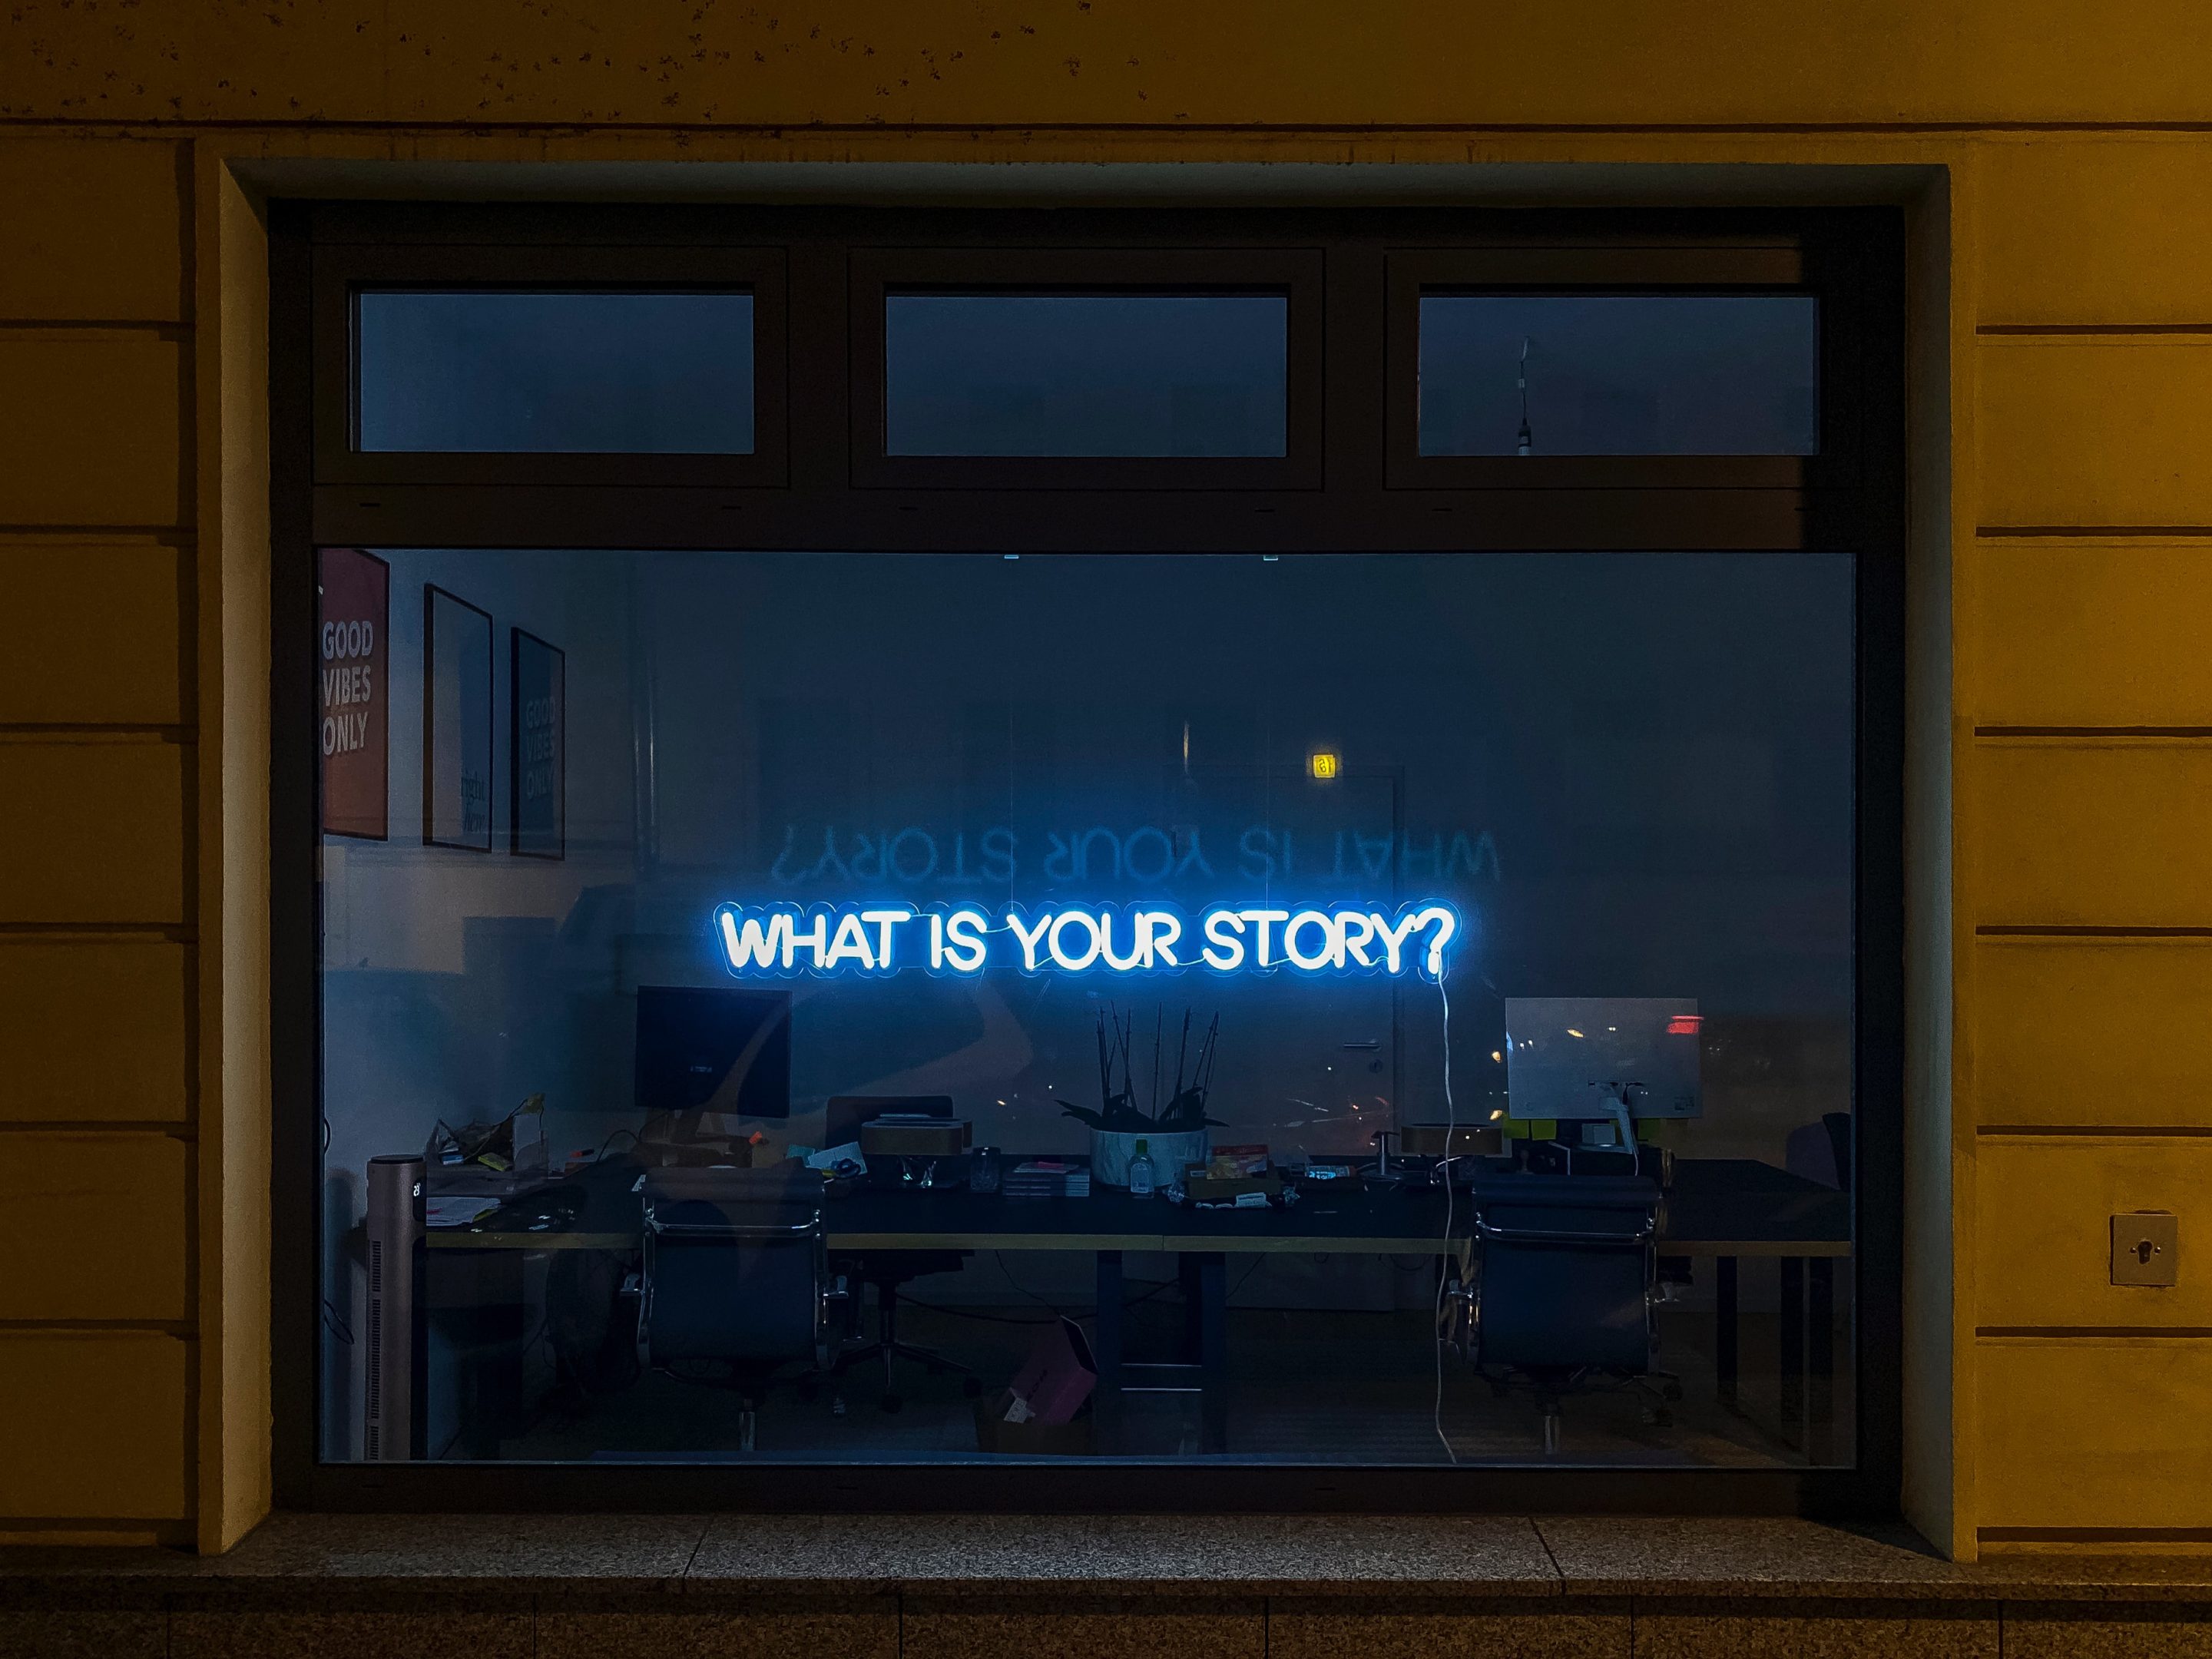 Blue neon sign that says "what is your story?"